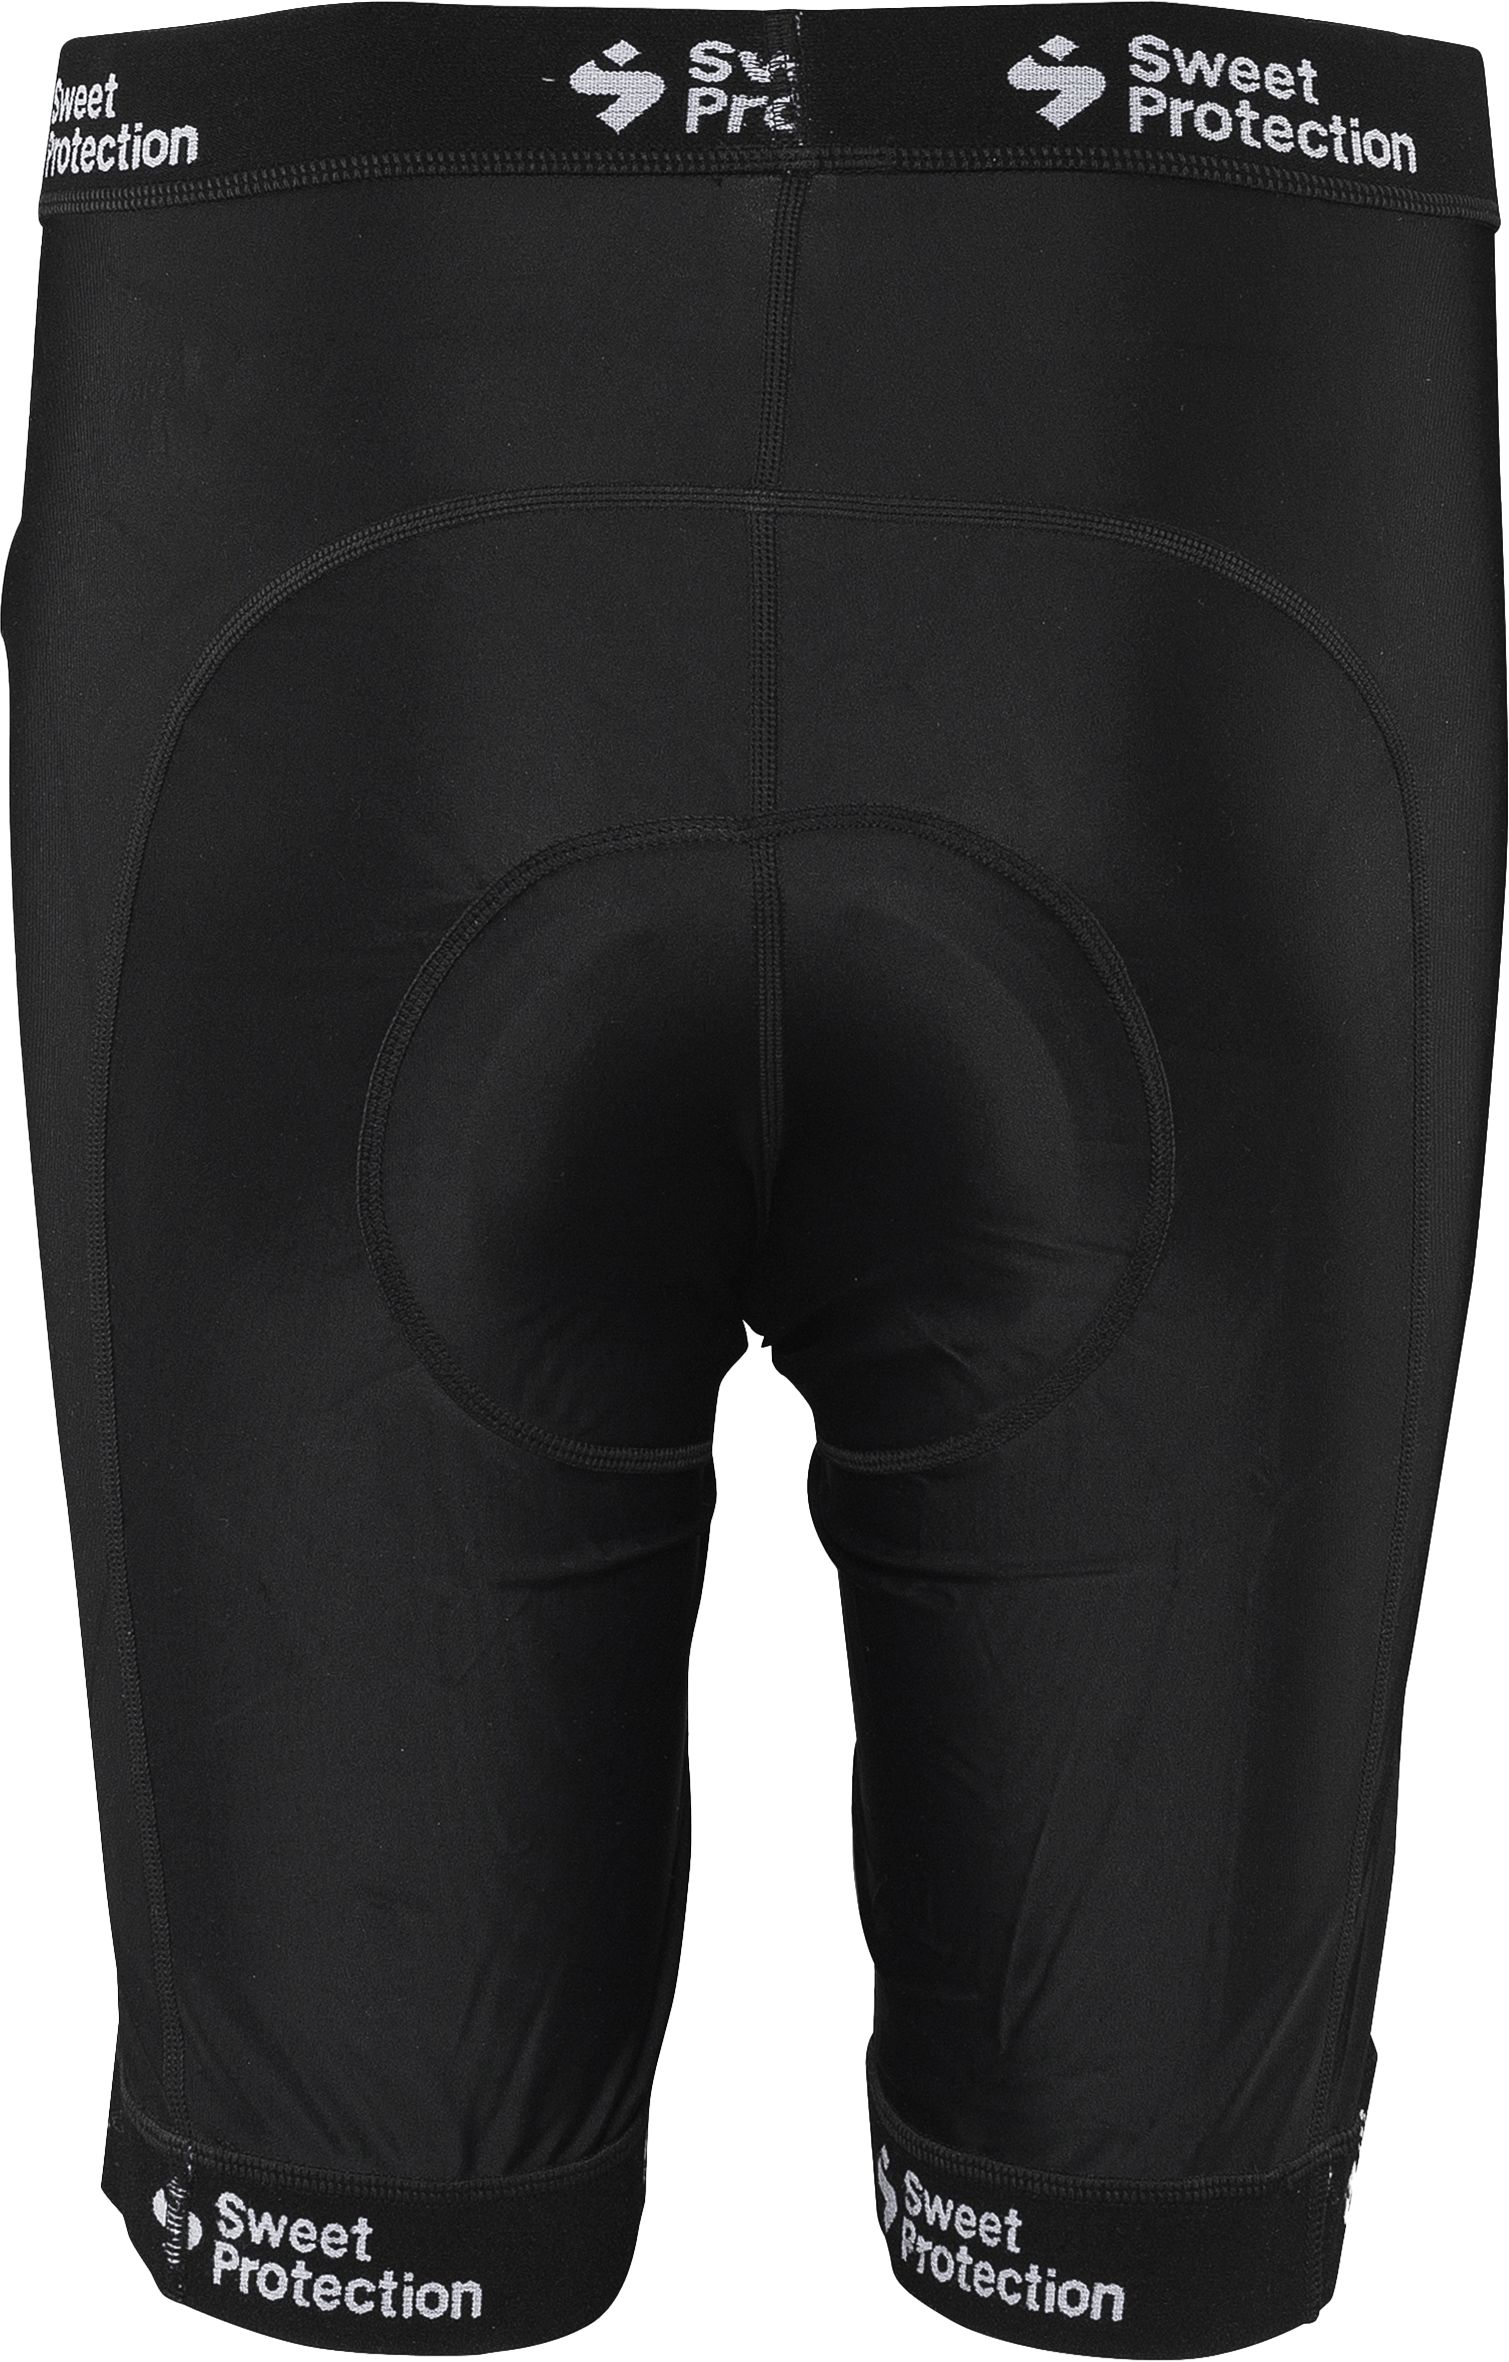 SWEET PROTECTION, M HUNTER ROLLER SHORTS